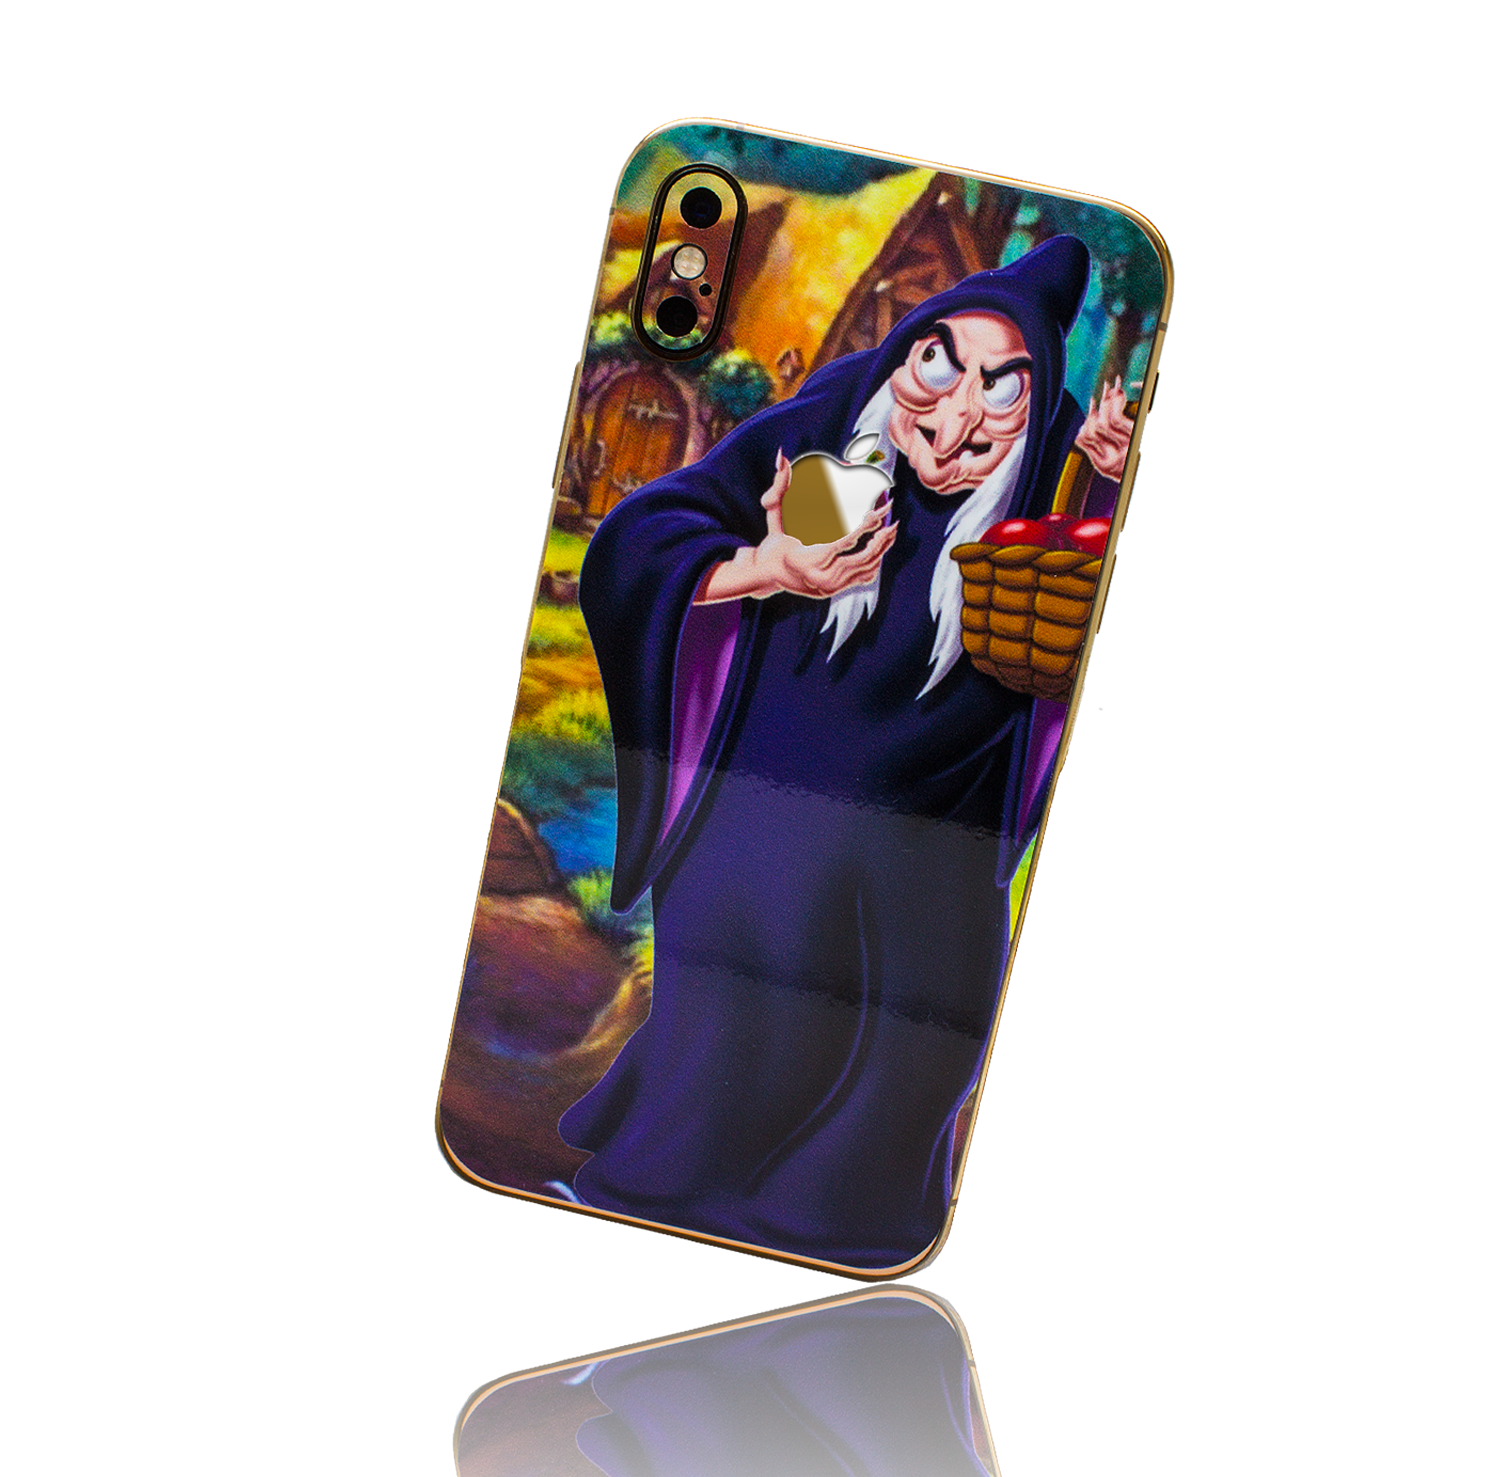 APPLE IPHONE X/XS SKIN - The Evil Witch